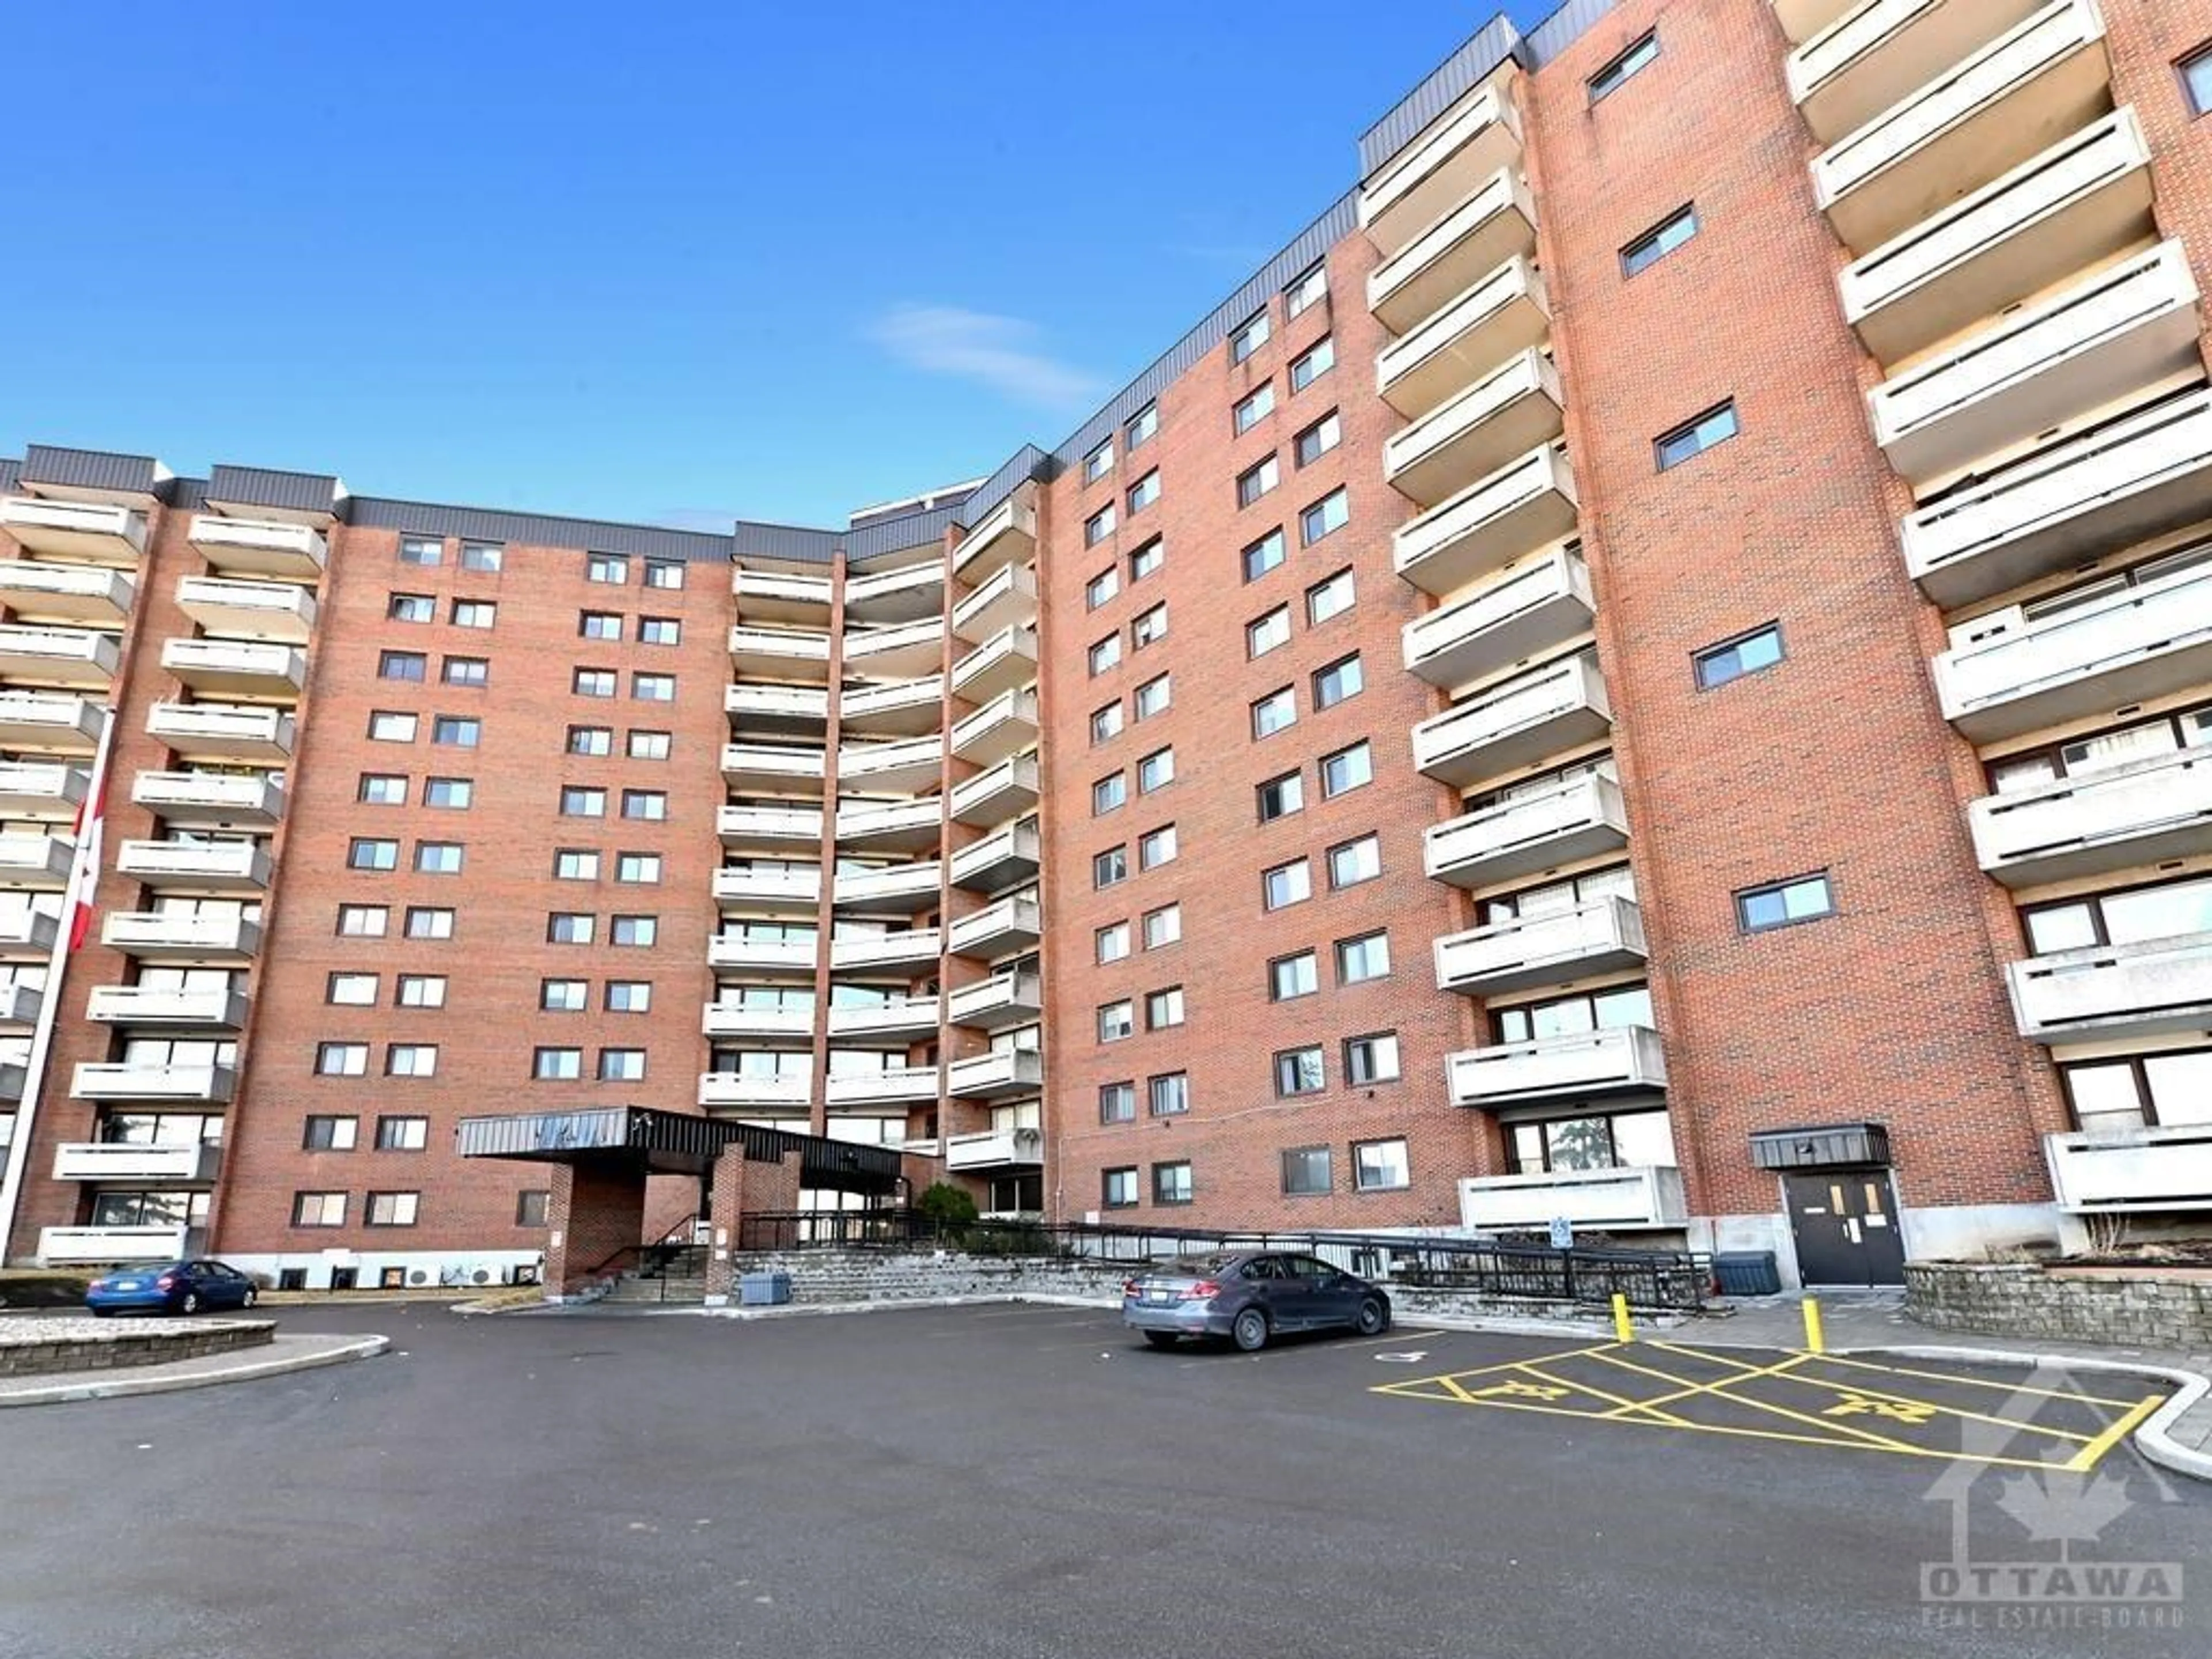 A pic from exterior of the house or condo for 3100 CARLING Ave #707, Ottawa Ontario K2B 6J6